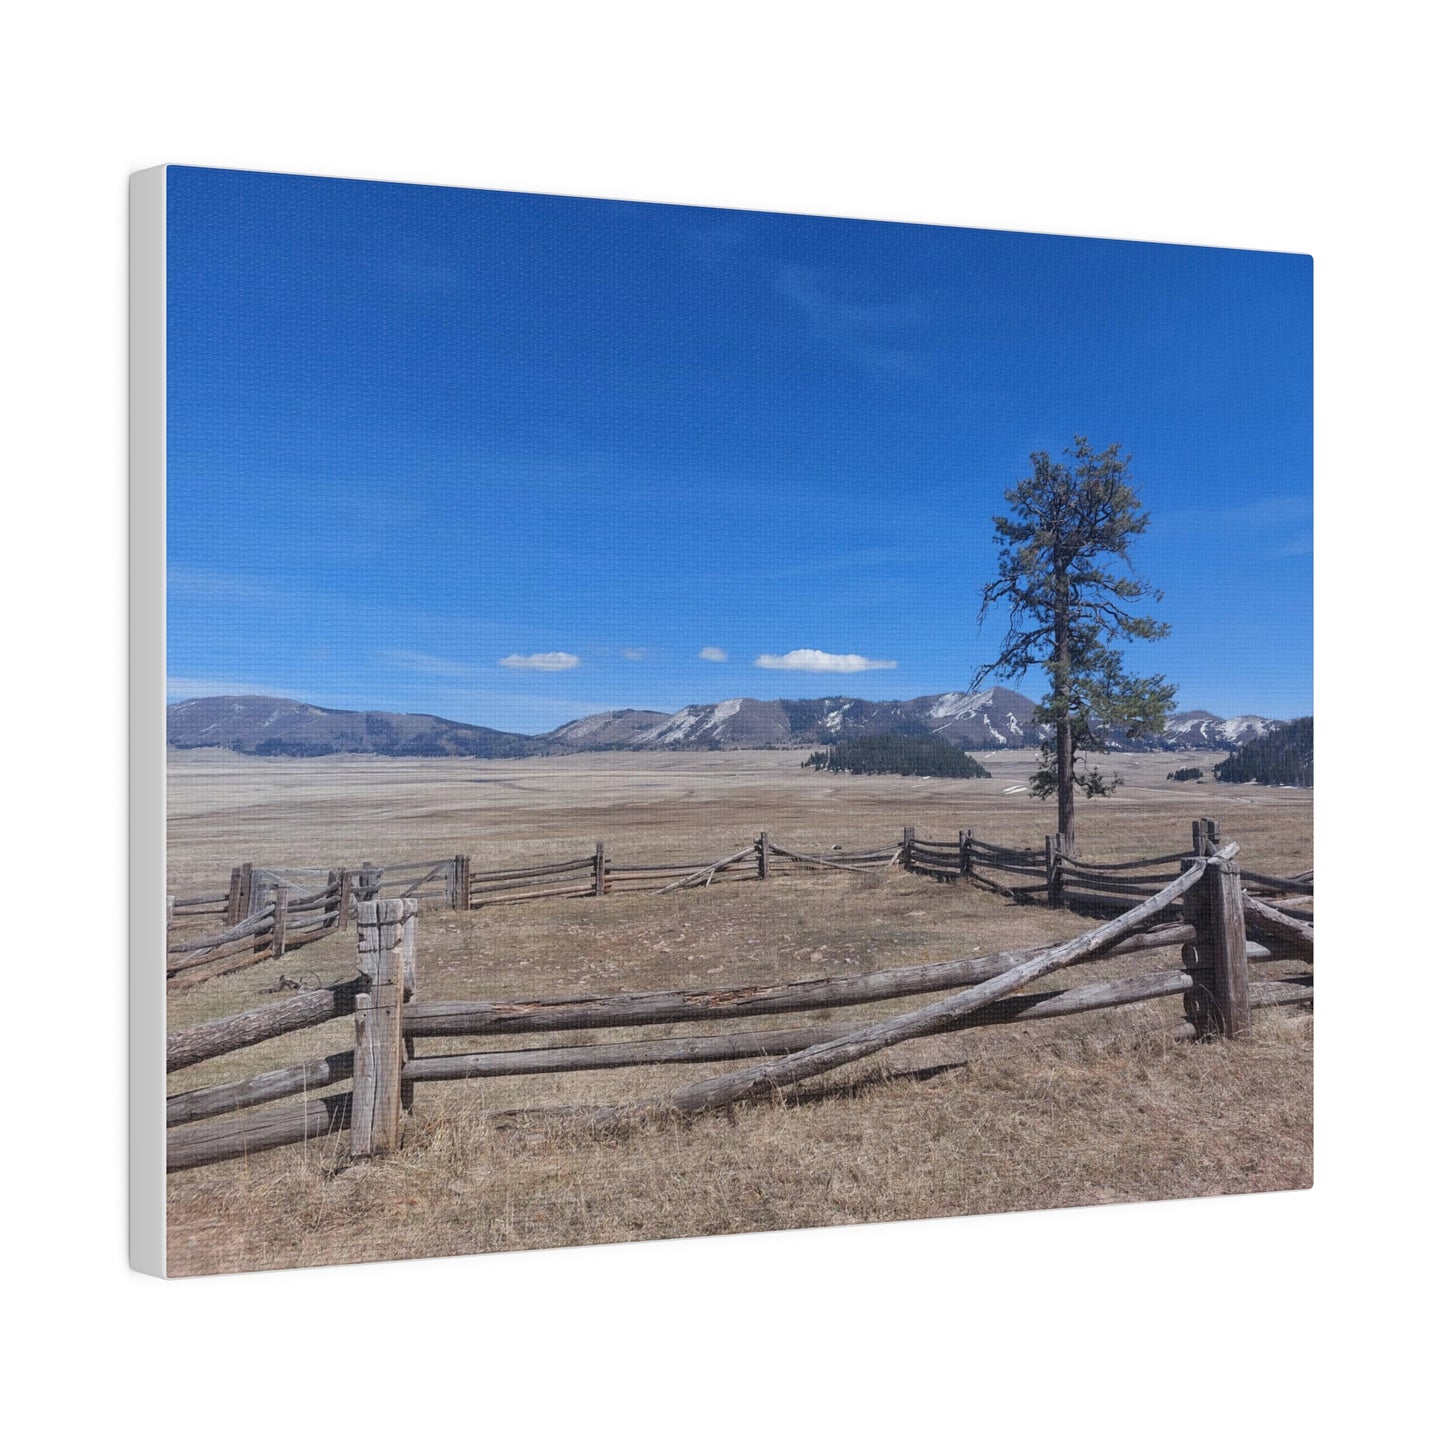 The Valles Caldera on Matte Canvas, Stretched, 0.75"